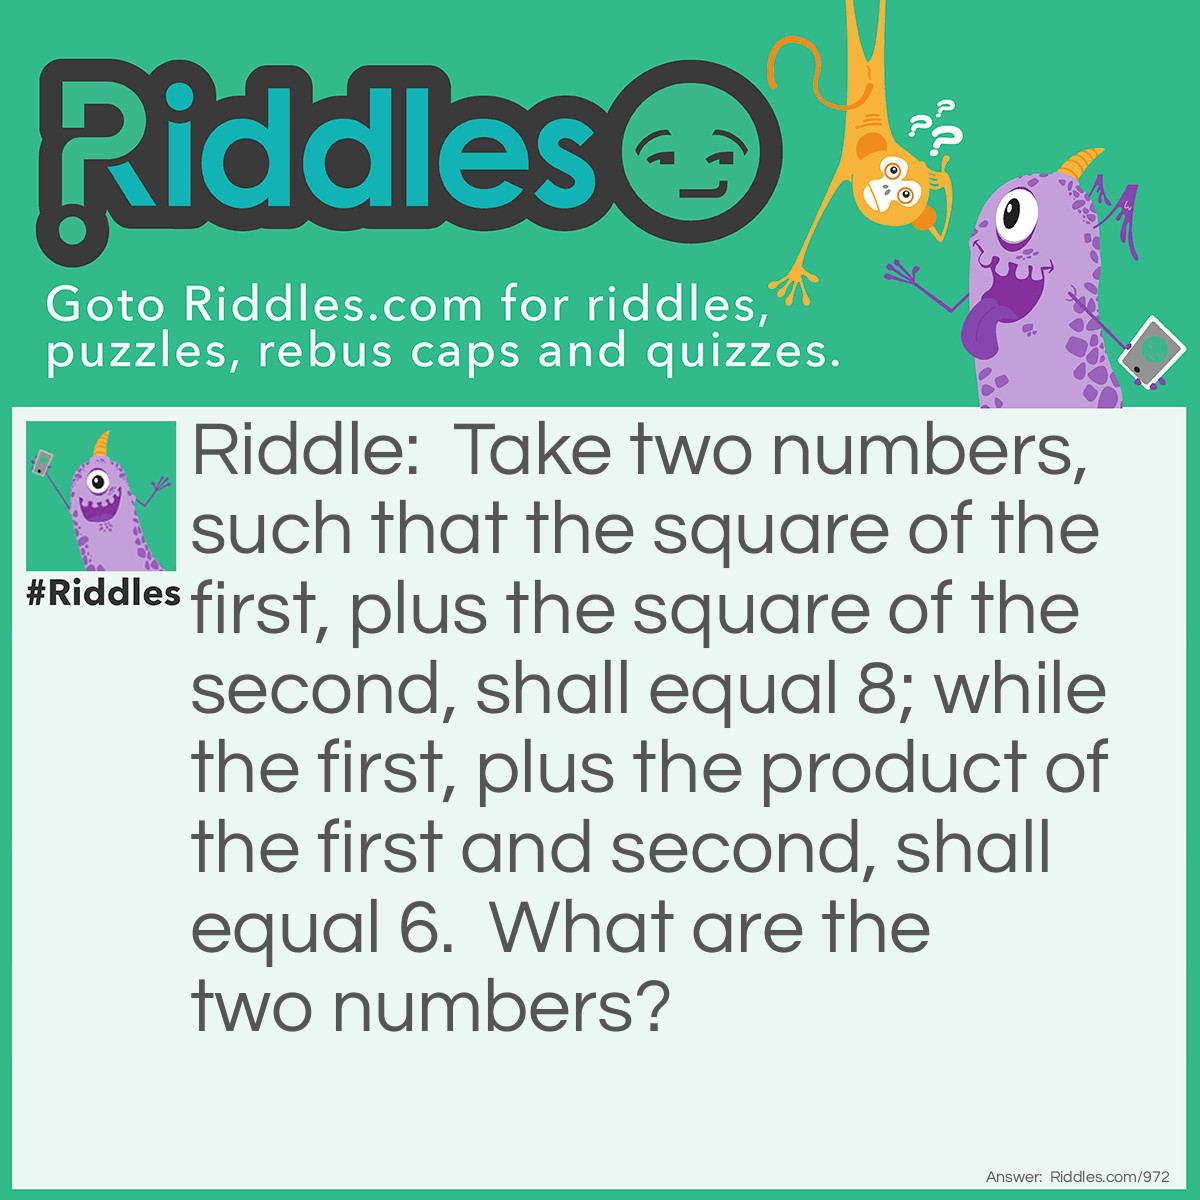 Riddle: Take two numbers, such that the square of the first, plus the square of the second, shall equal 8; while the first, plus the product of the first and second, shall equal 6. What are the two numbers? Answer: 2 and 2.